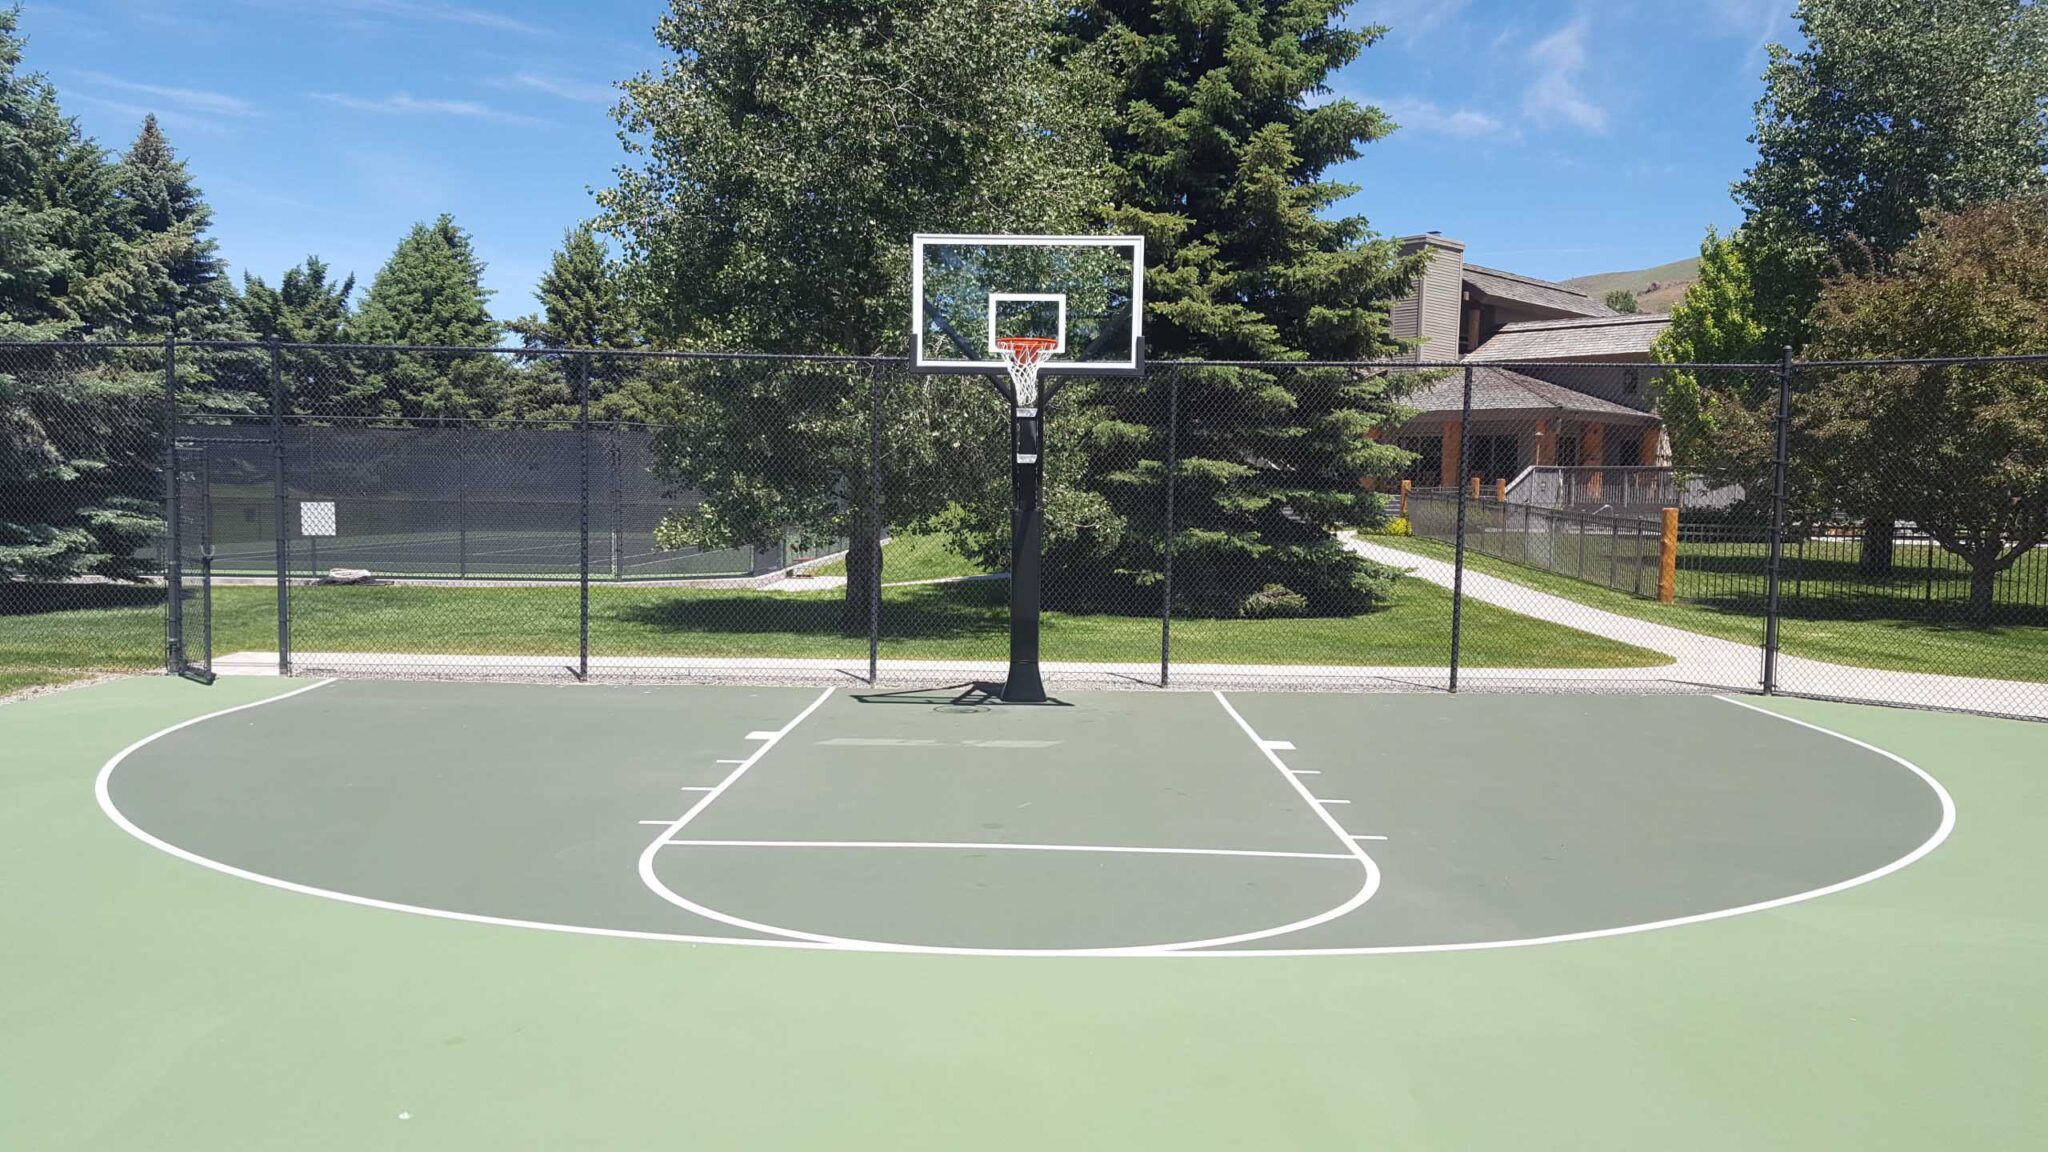 A new half-court basketball surface with fencing and a green and white color sheme.